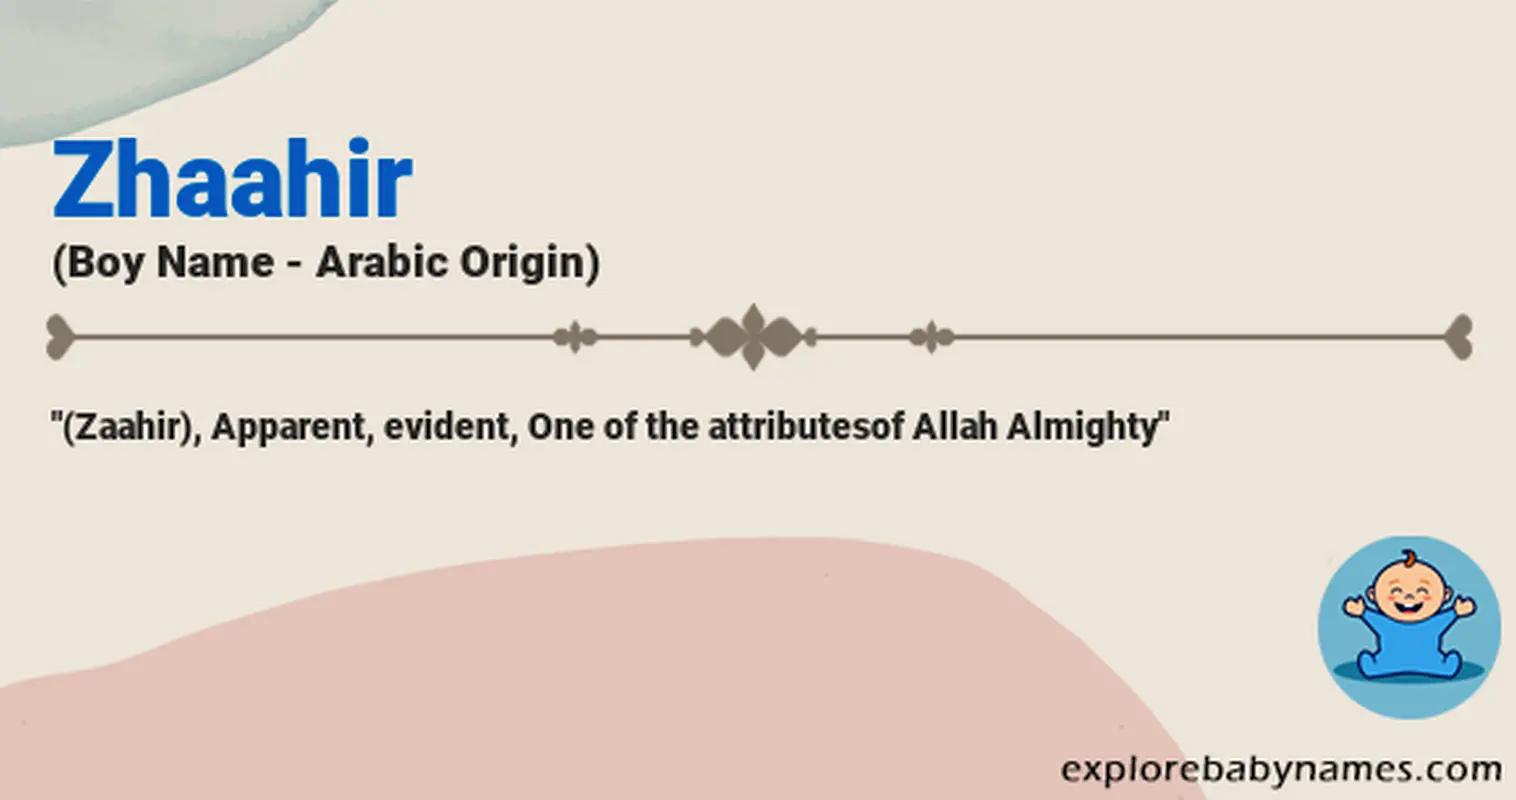 Meaning of Zhaahir